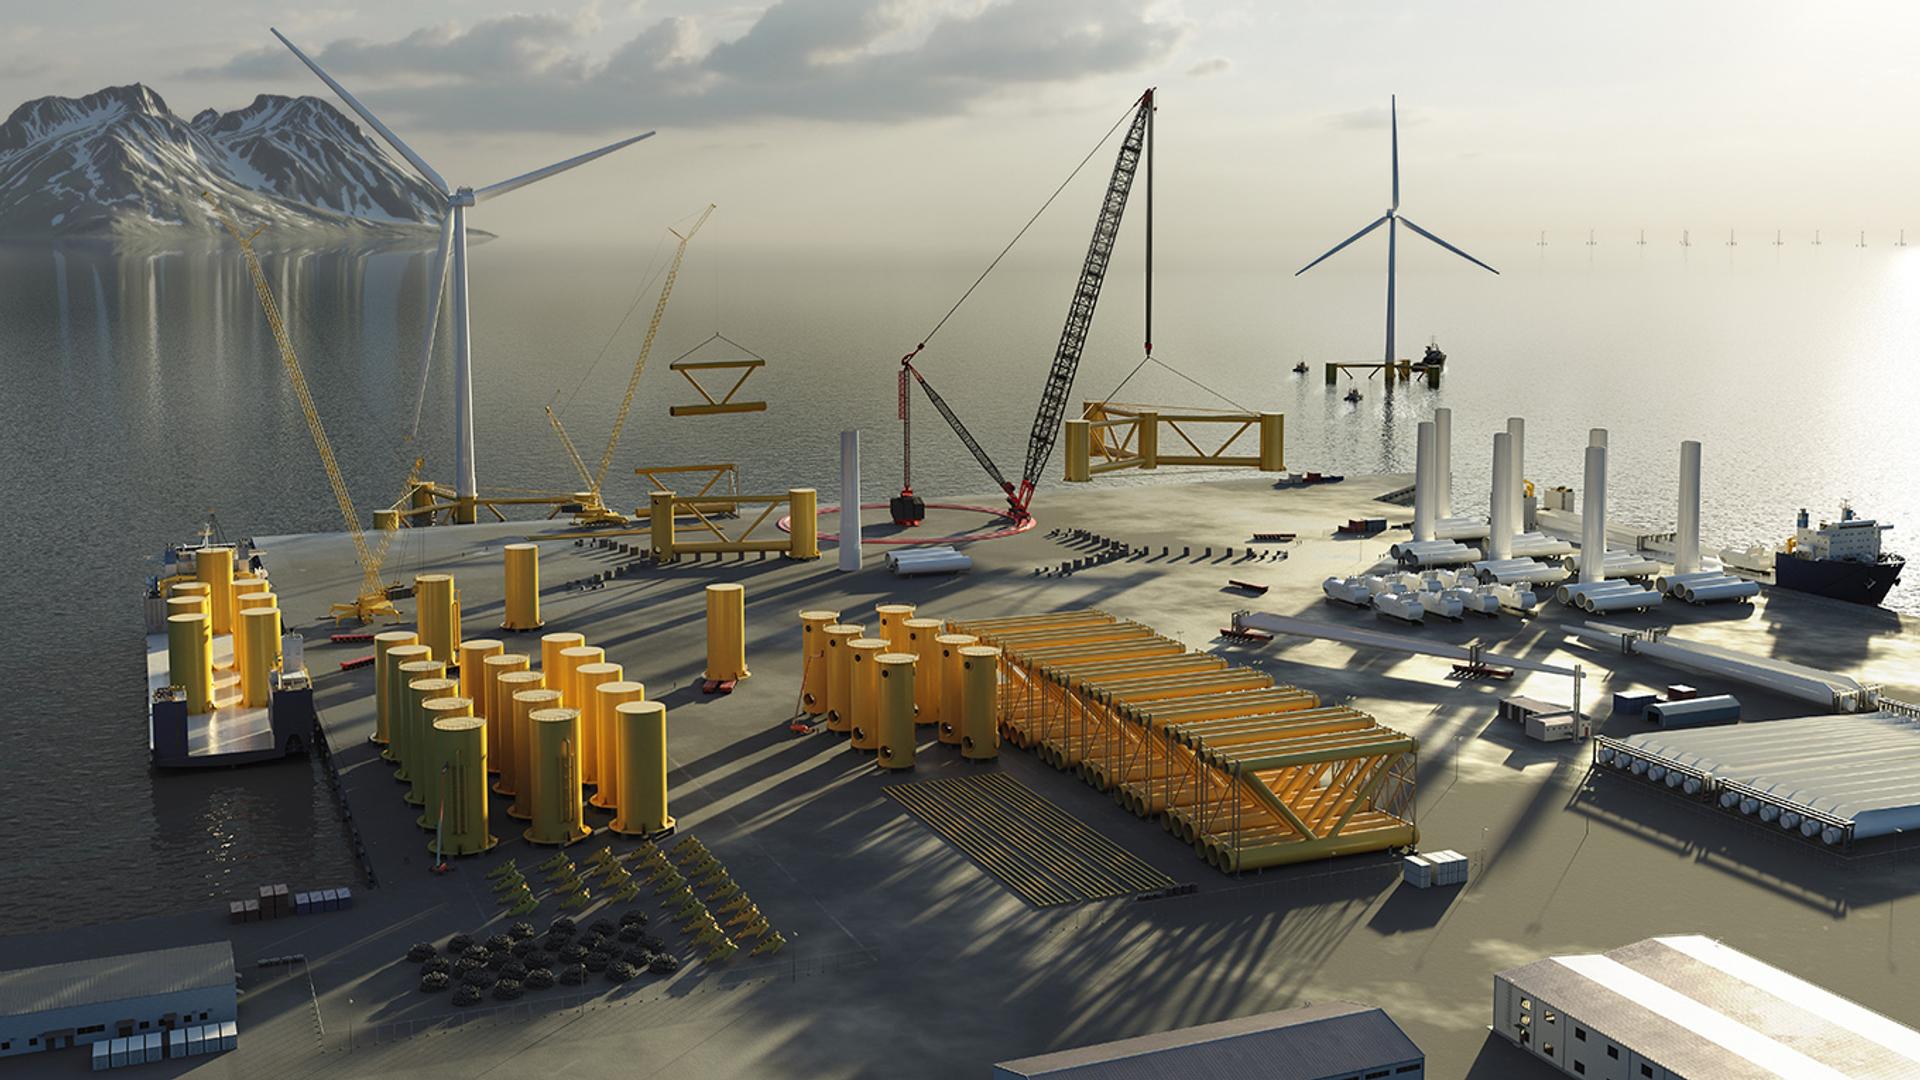 Assembly of an offshore wind turbine foundation in port